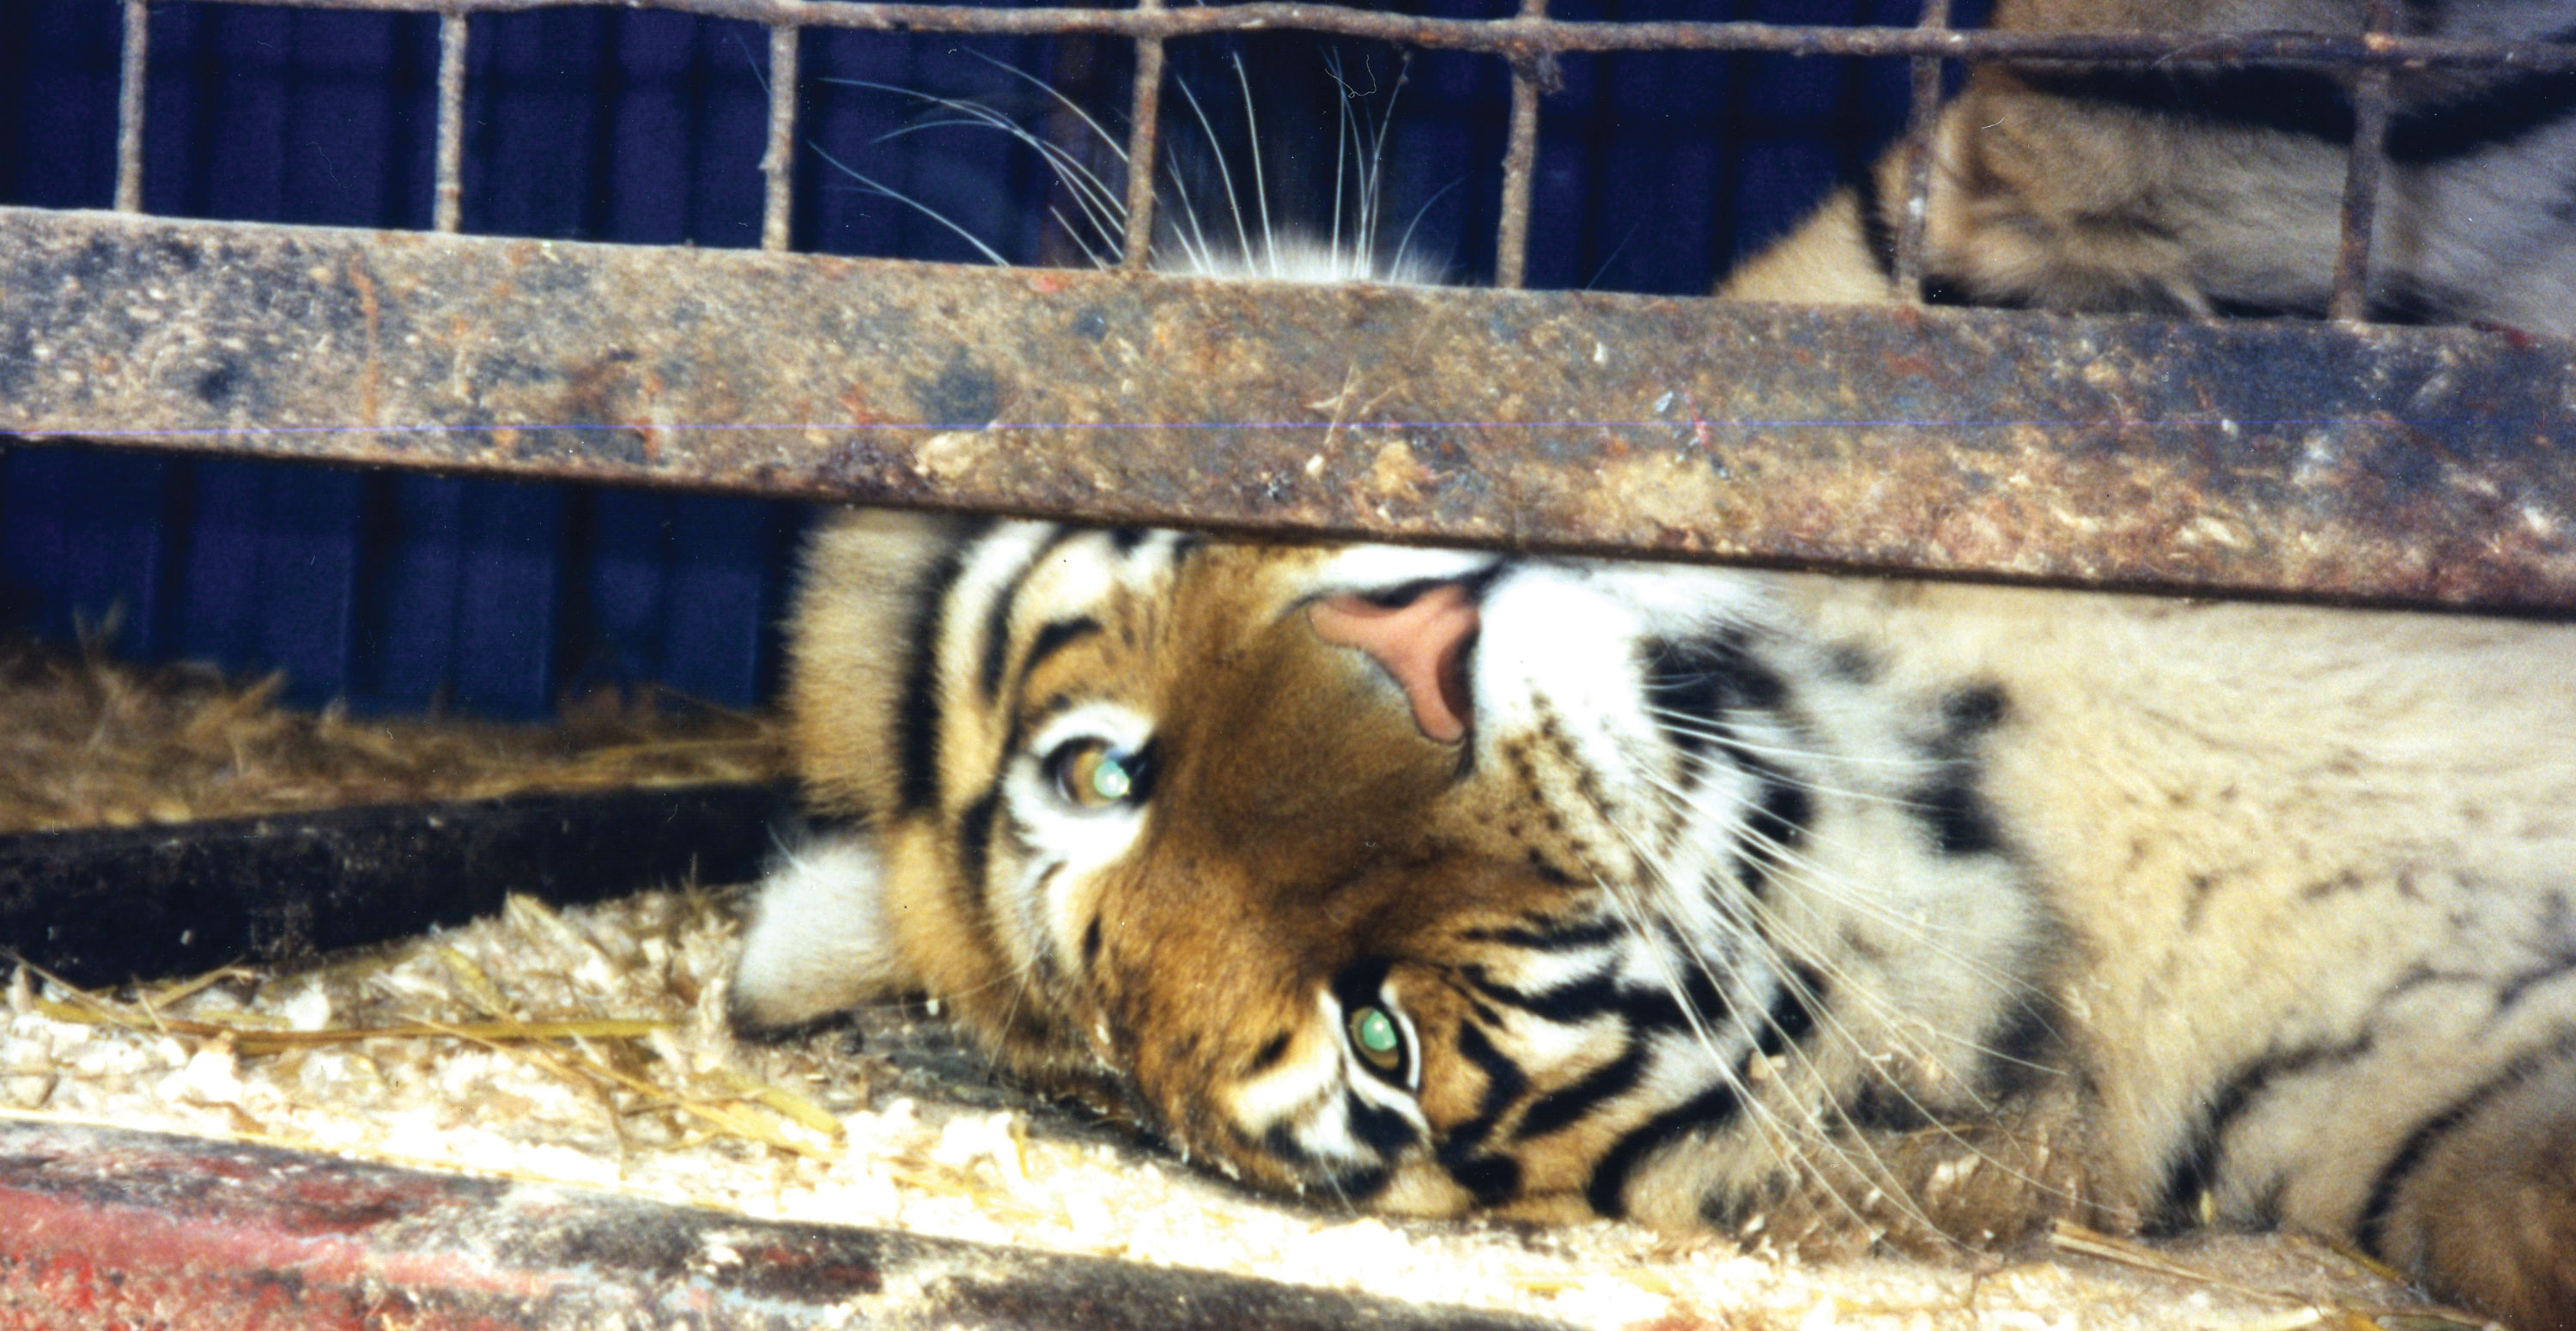 Chipperfield-caged-tiger-3k-x-1550 - Stop Circus Suffering